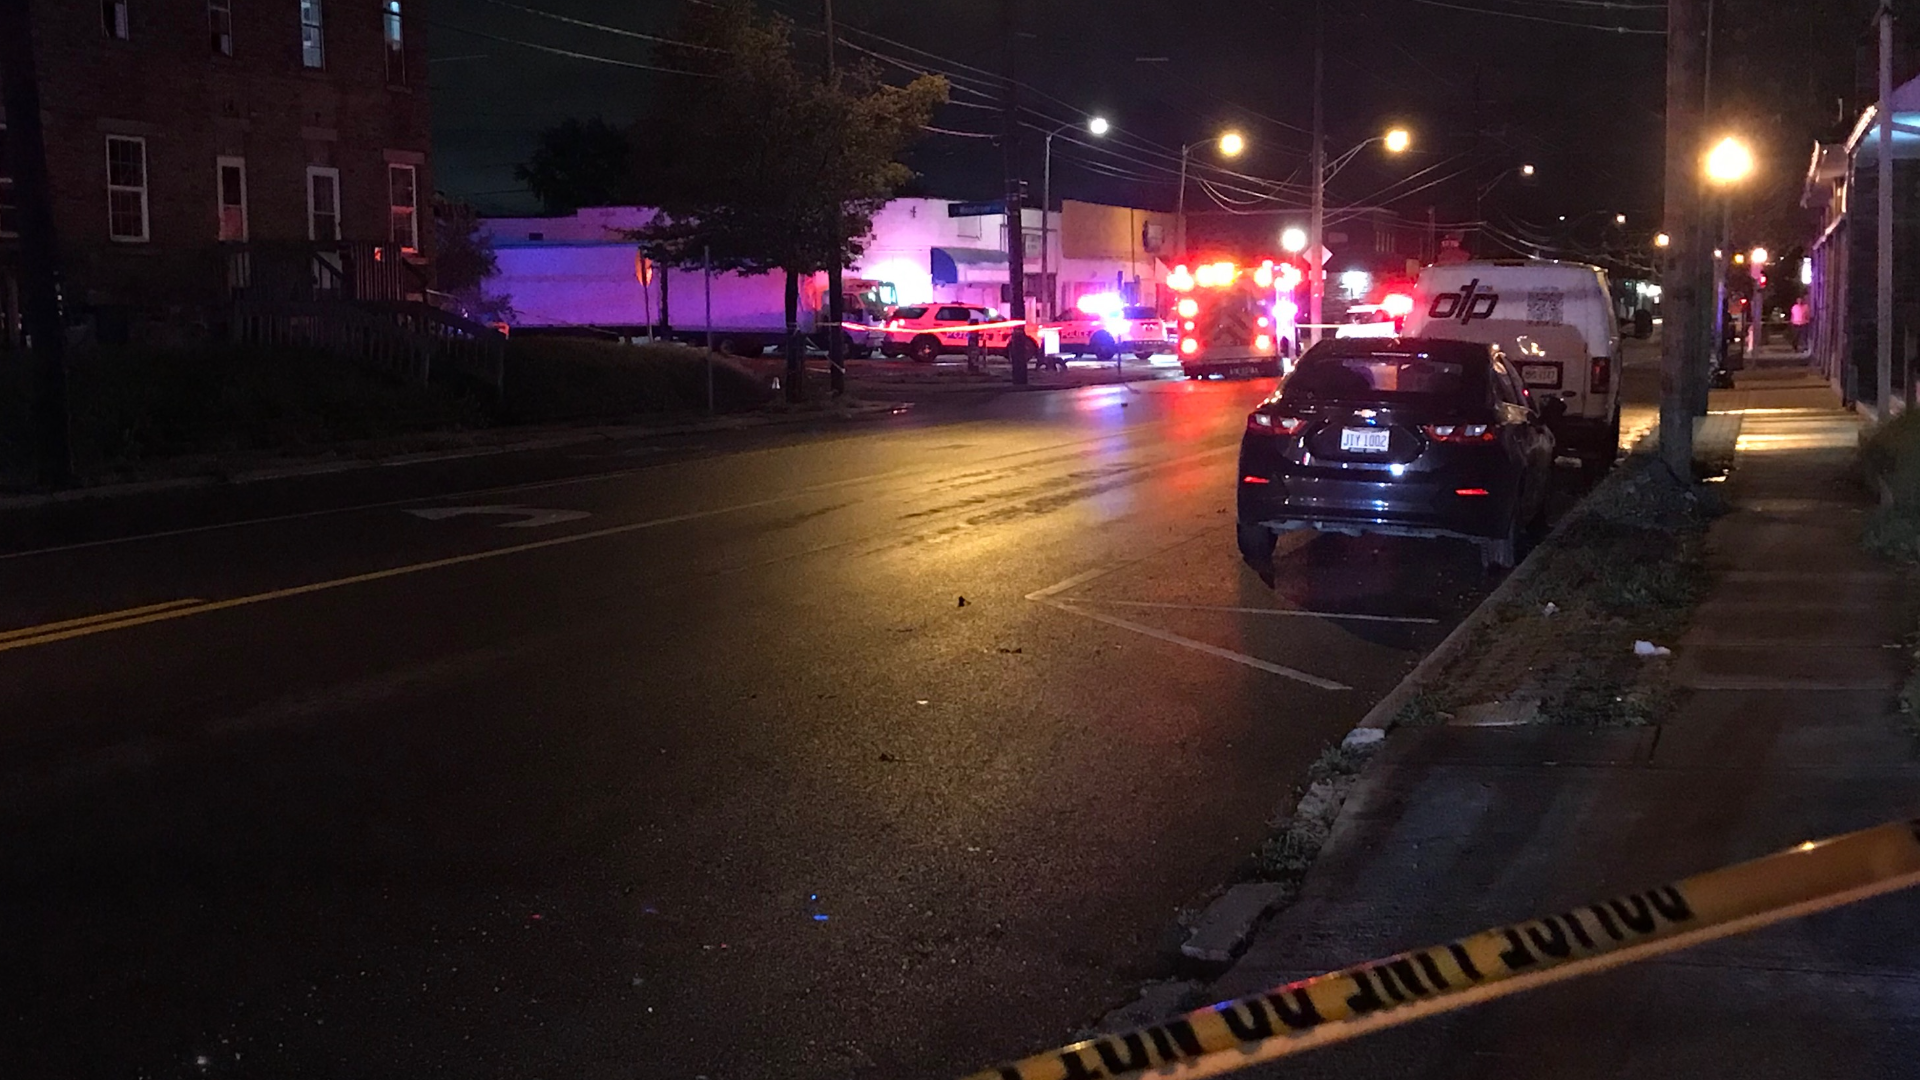 According to Columbus police, they were called the intersection of Parsons Avenue and Woodrow Avenue just before 10:50 p.m. on a report of a shooting.